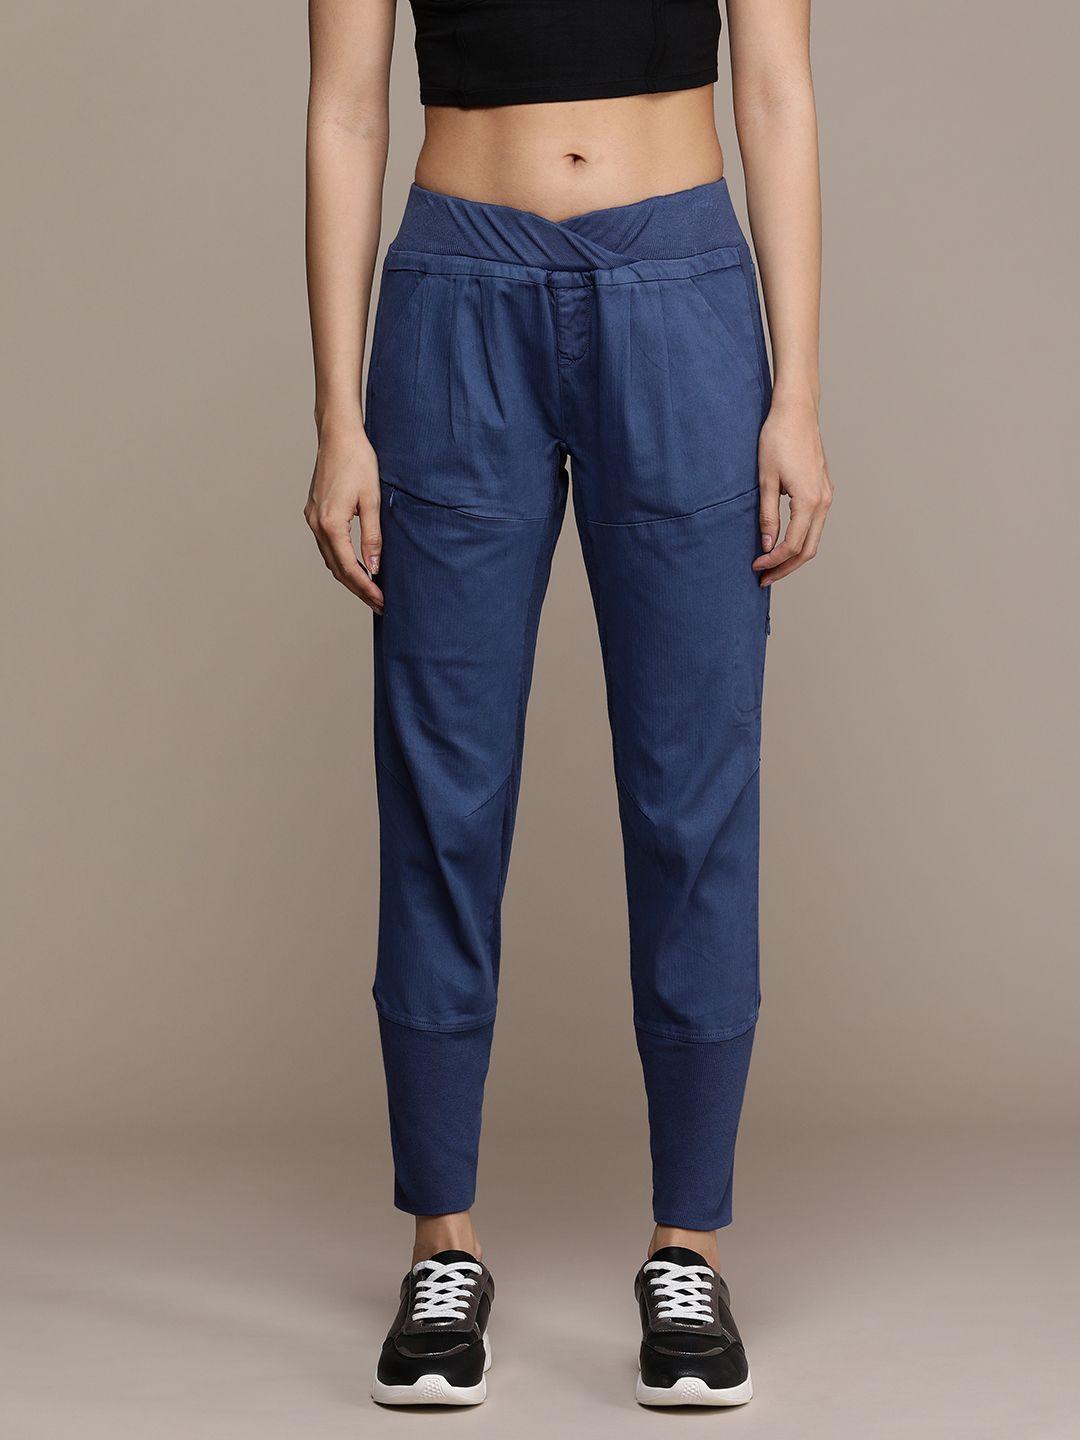 the-roadster-lifestyle-co.women-solid-joggers-trousers